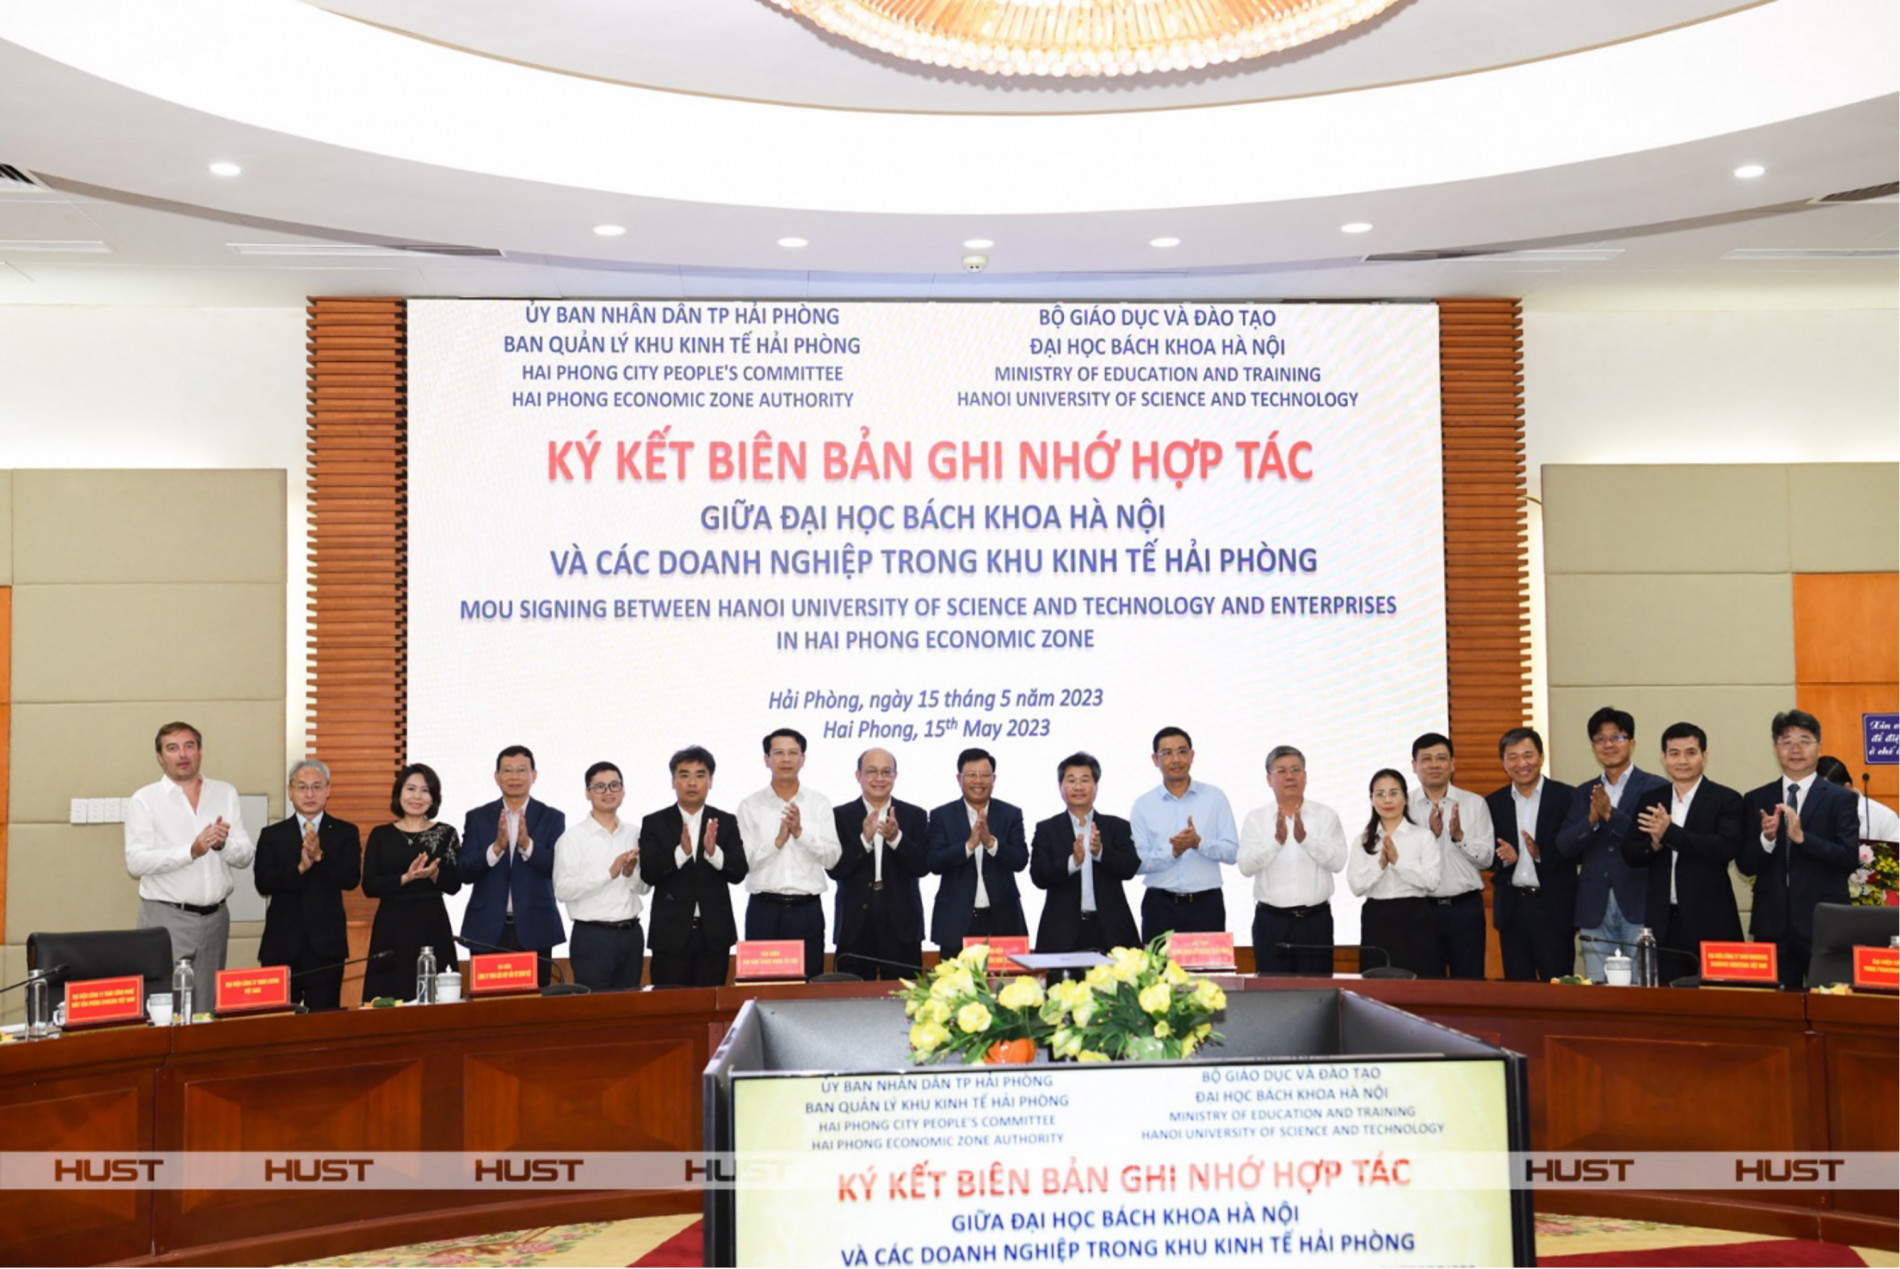 Potential collaboration between Hanoi University of Science and Technology and Enterprises in Hai Phong Economic Zone